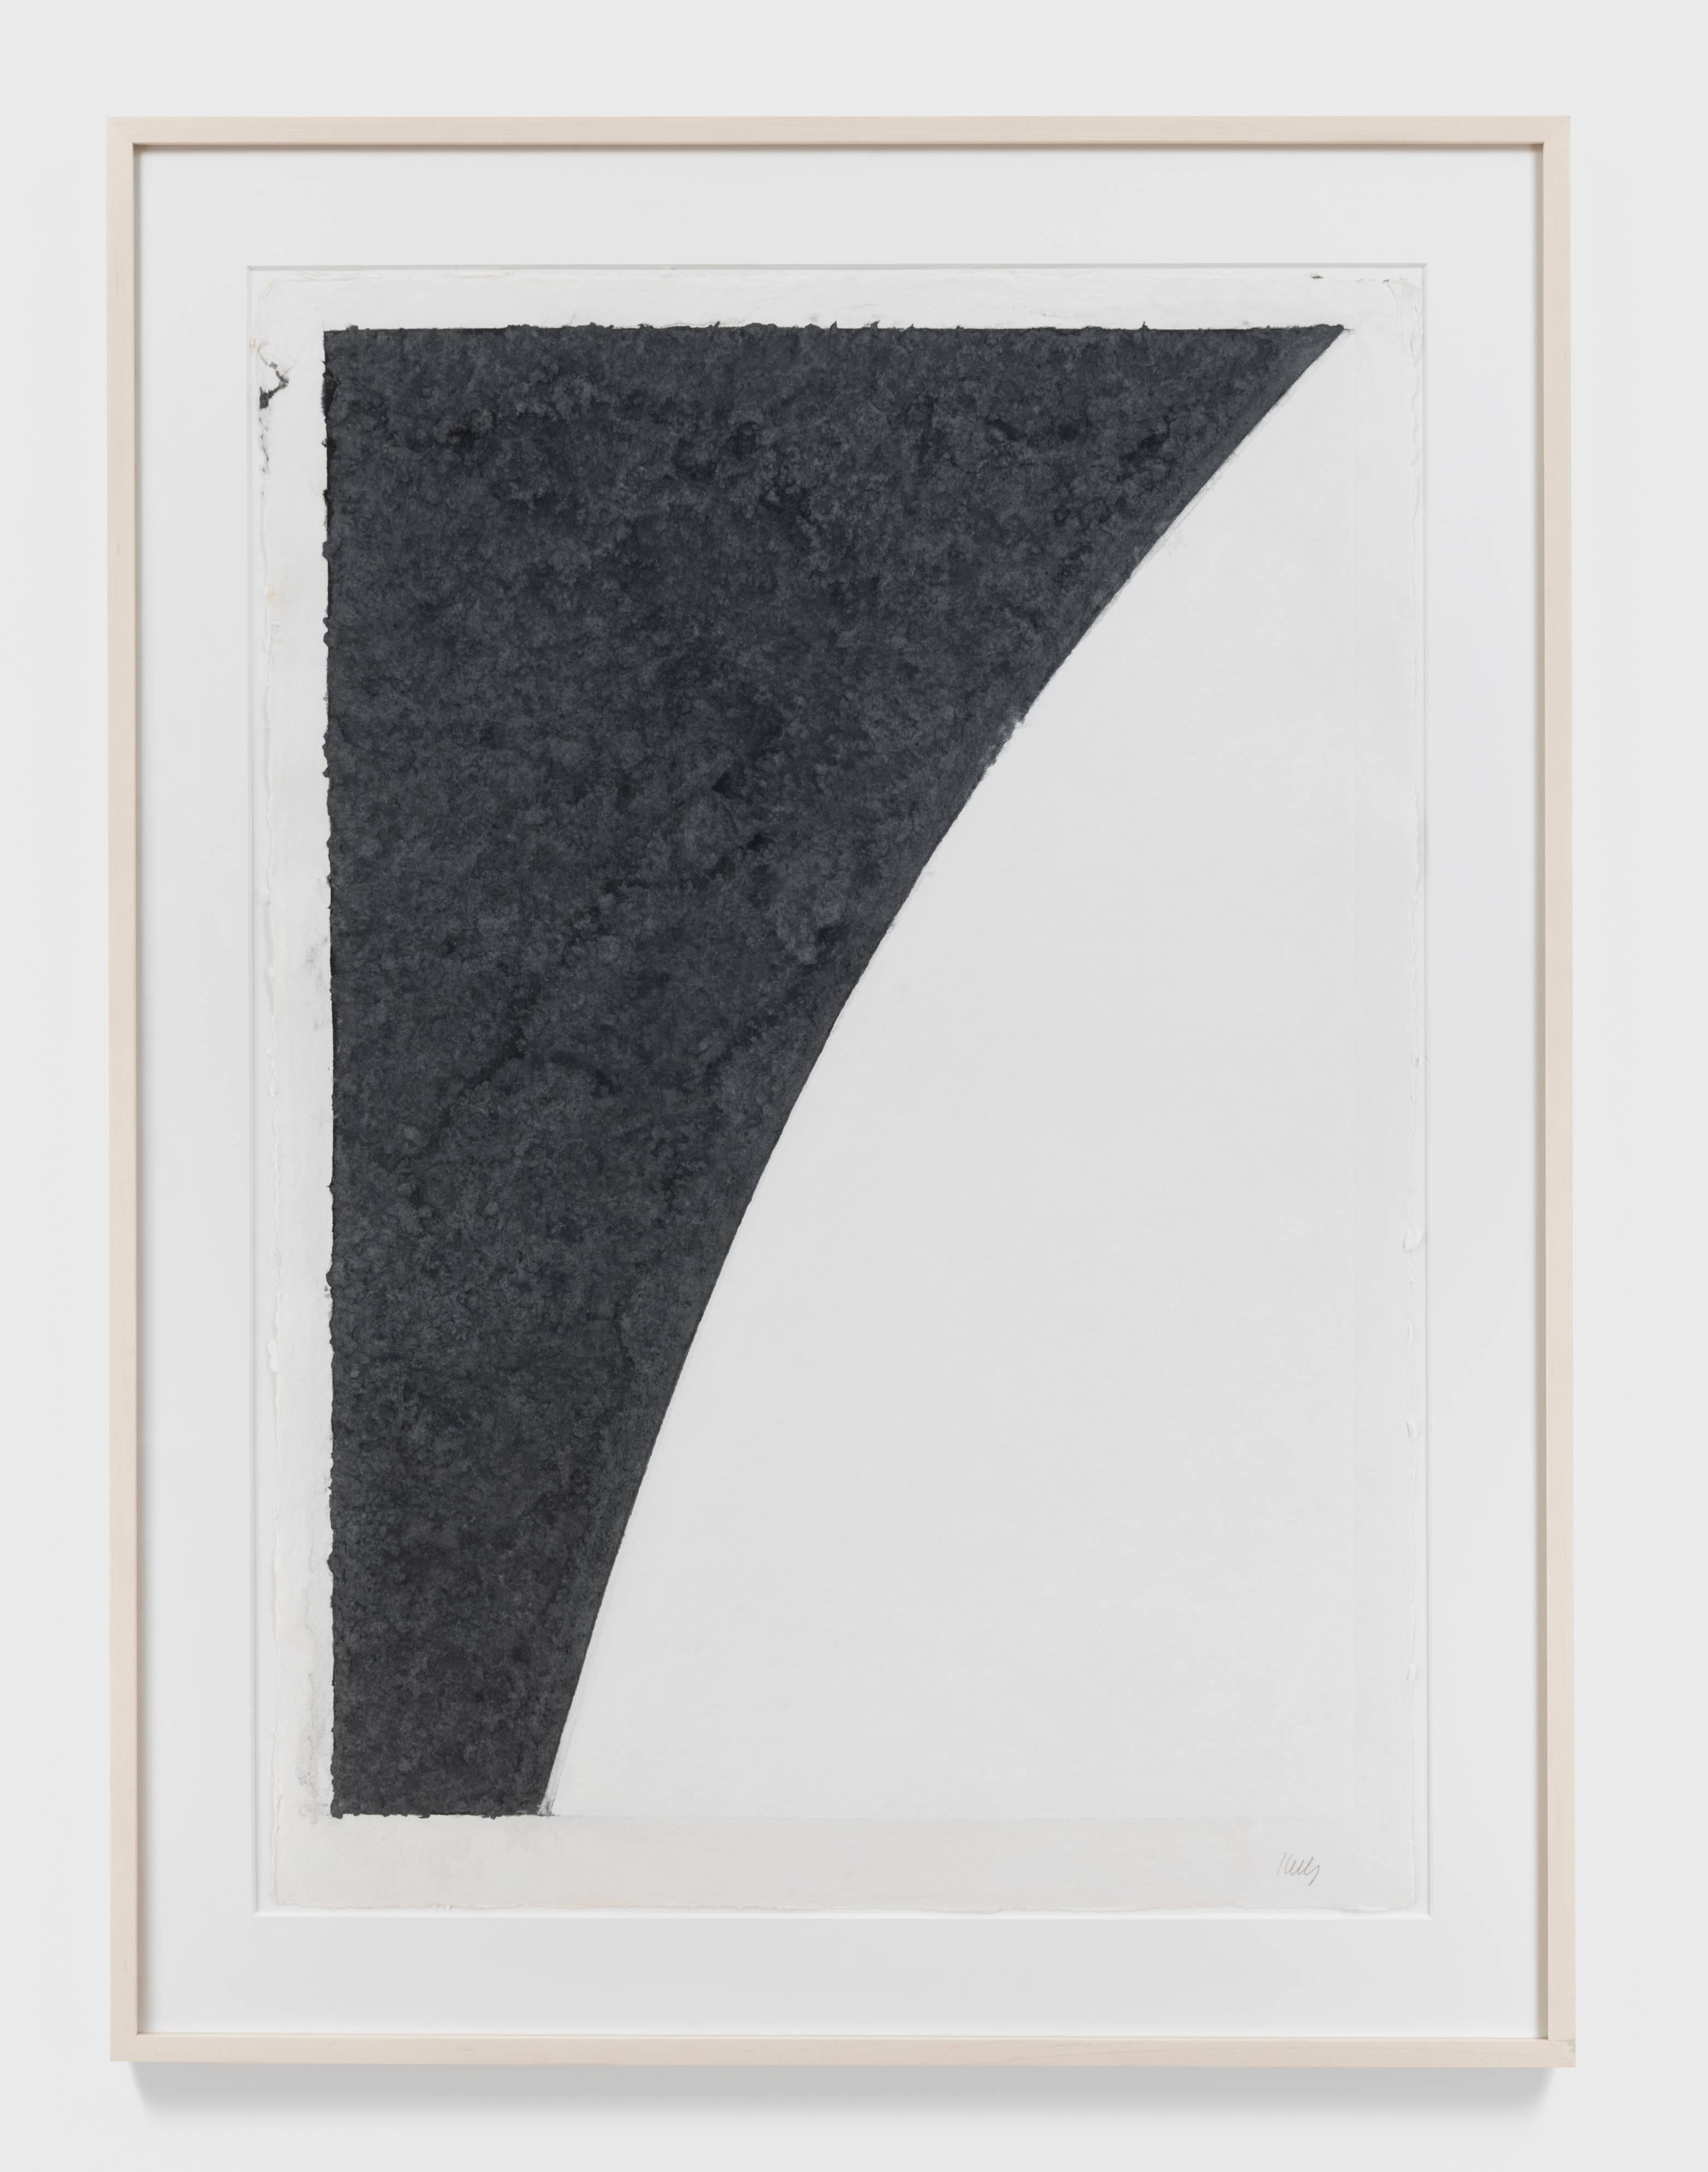 Colored Paper Image I (White Curve with Black I) - Print by Ellsworth Kelly